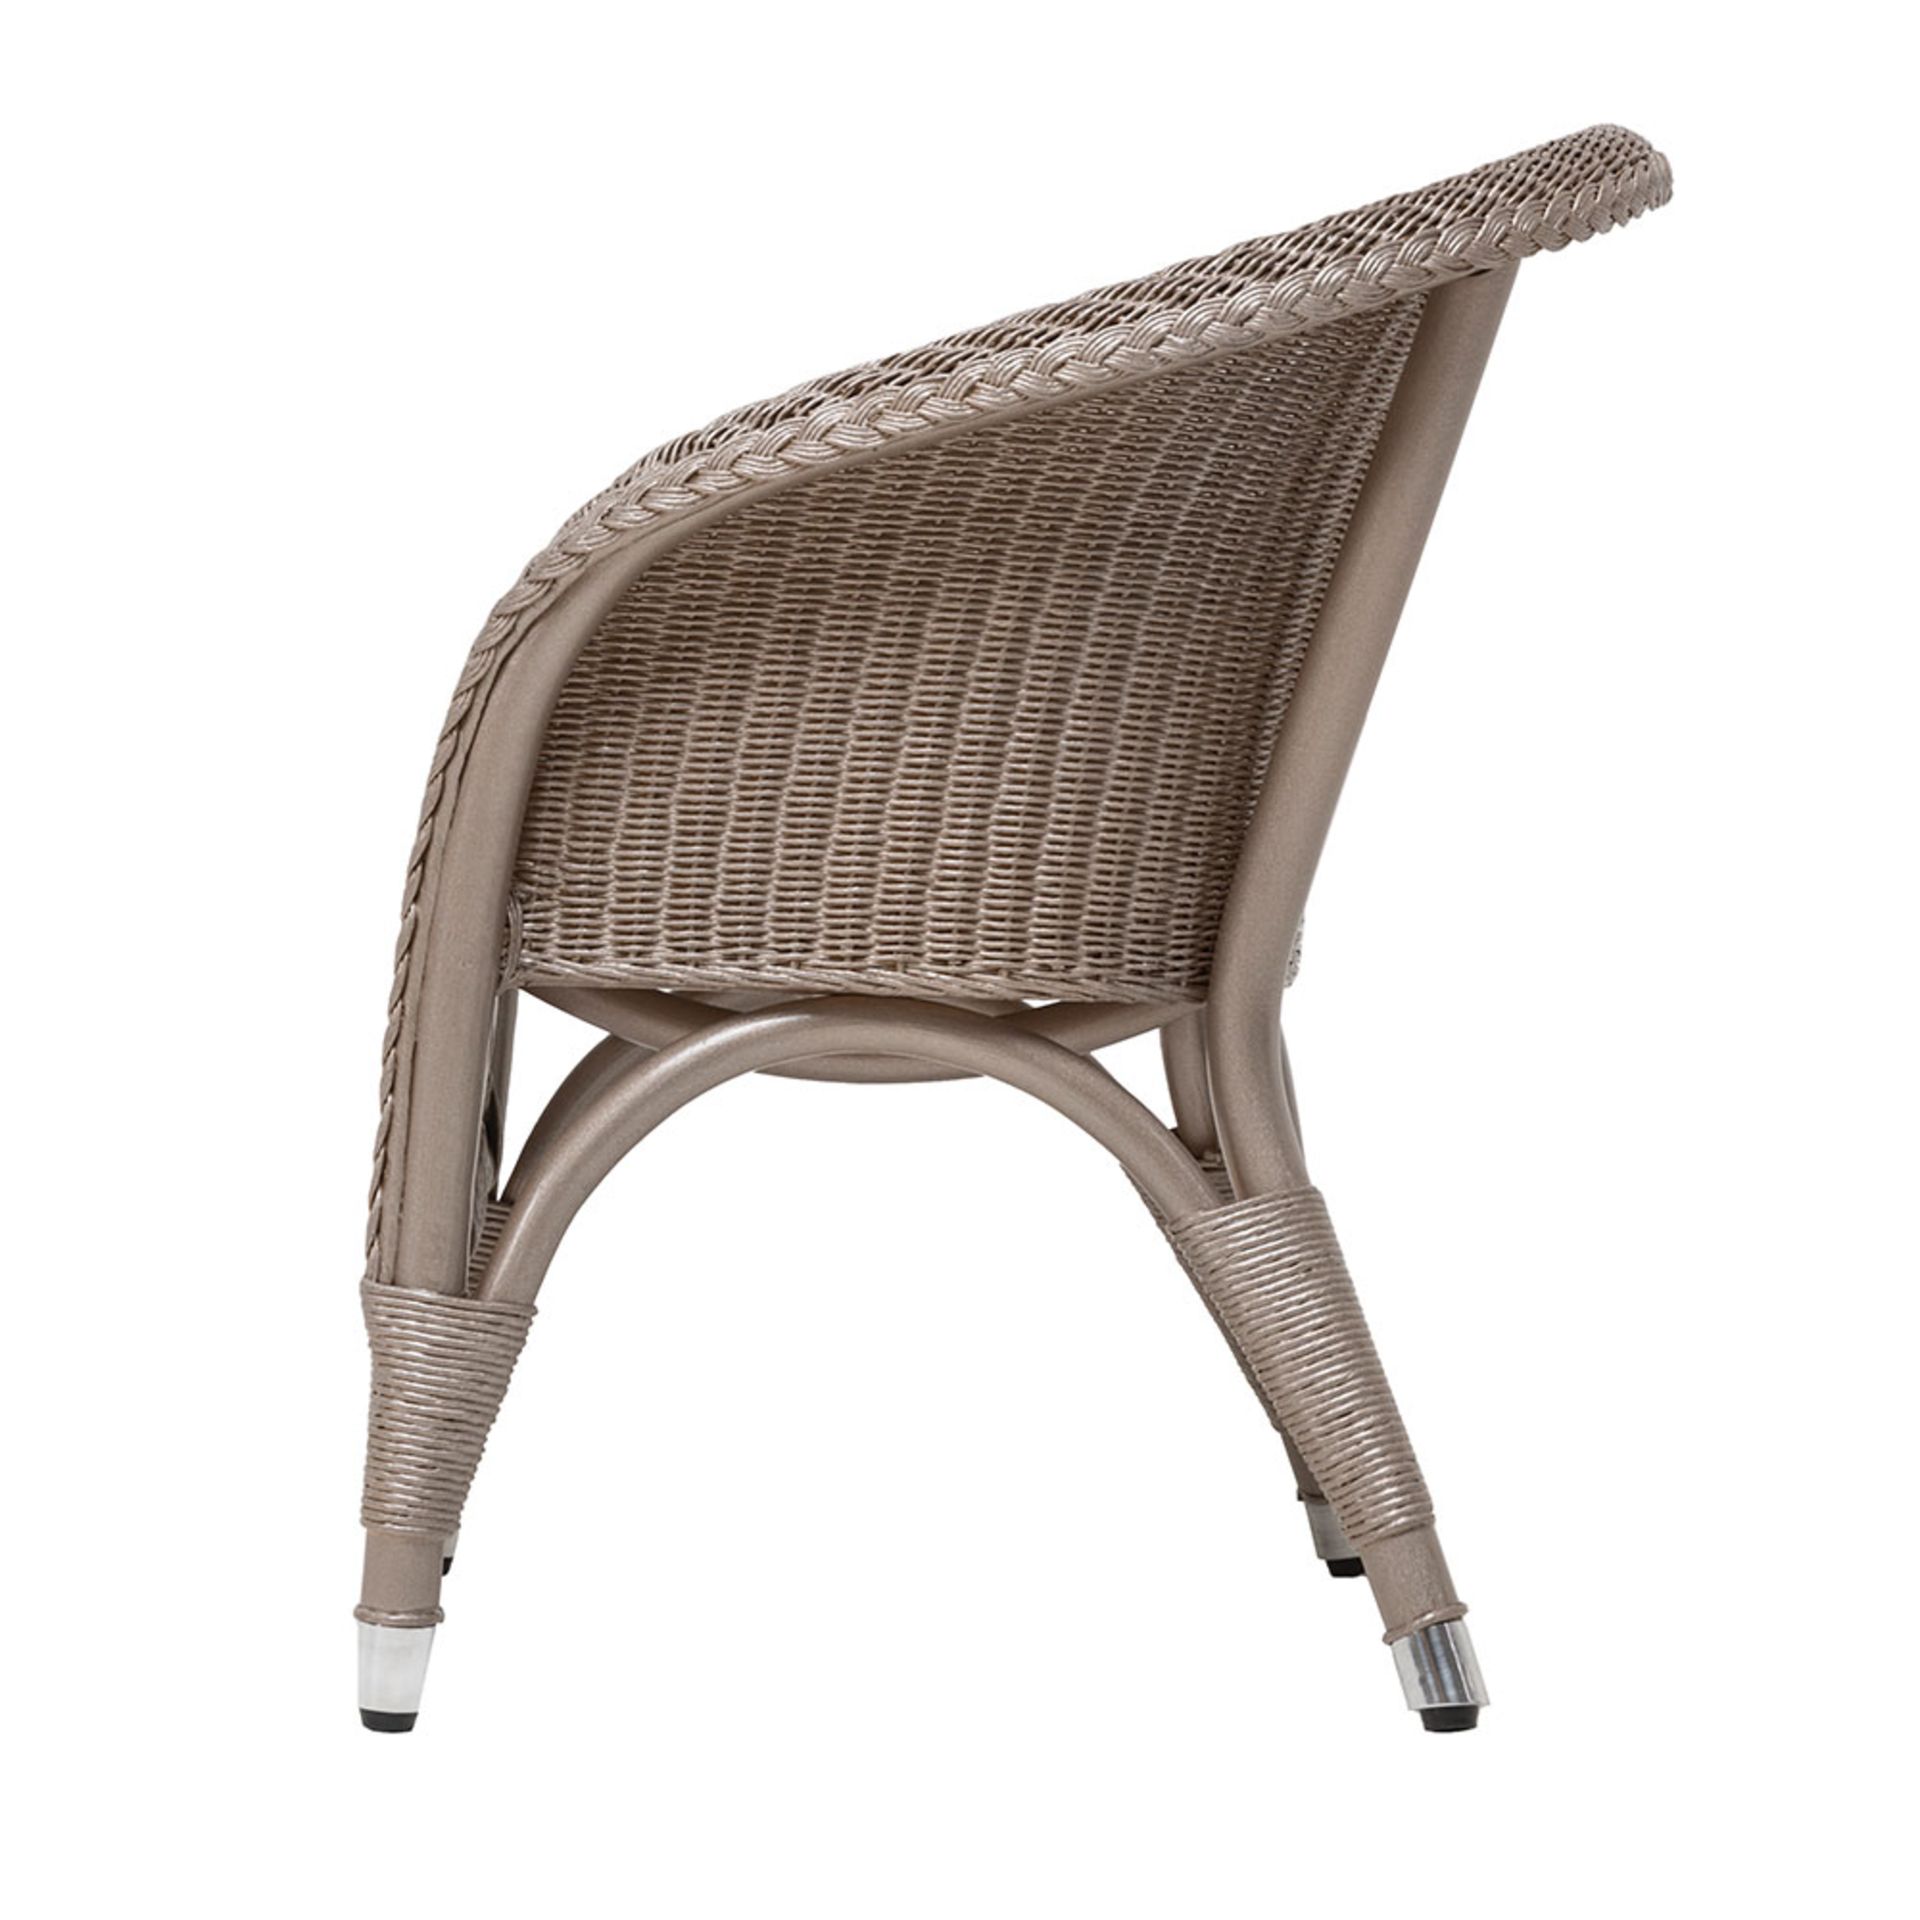 1 x Adorable Childrens Pookie Armchair - Lloyd Loom Weave on a Bent Wood Frame - RRP £275! - Image 5 of 5